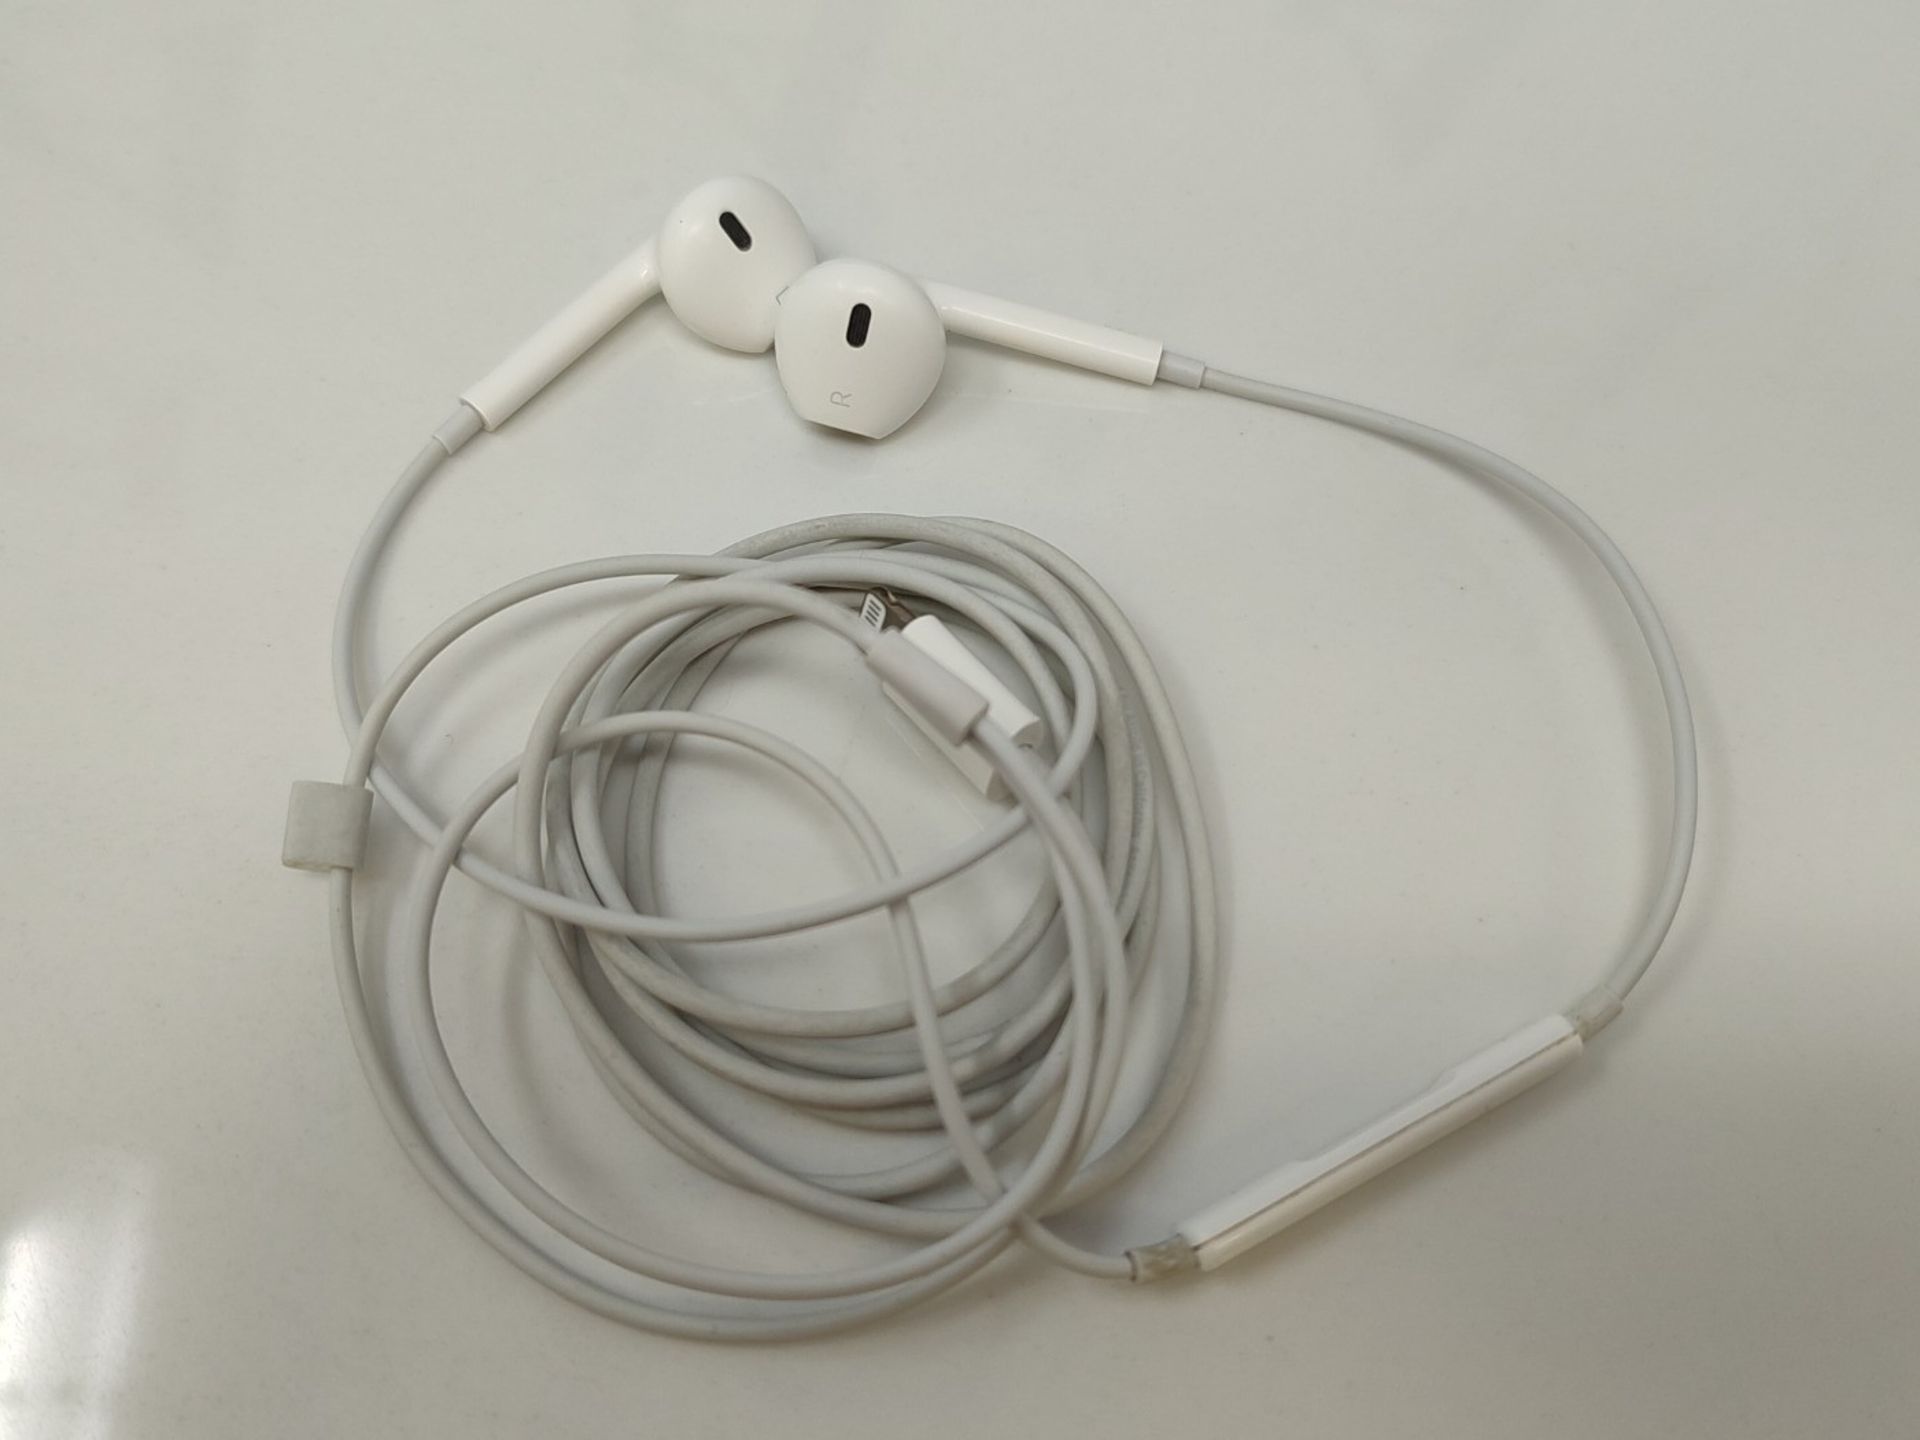 Apple EarPods with Lightning connector - Image 3 of 6